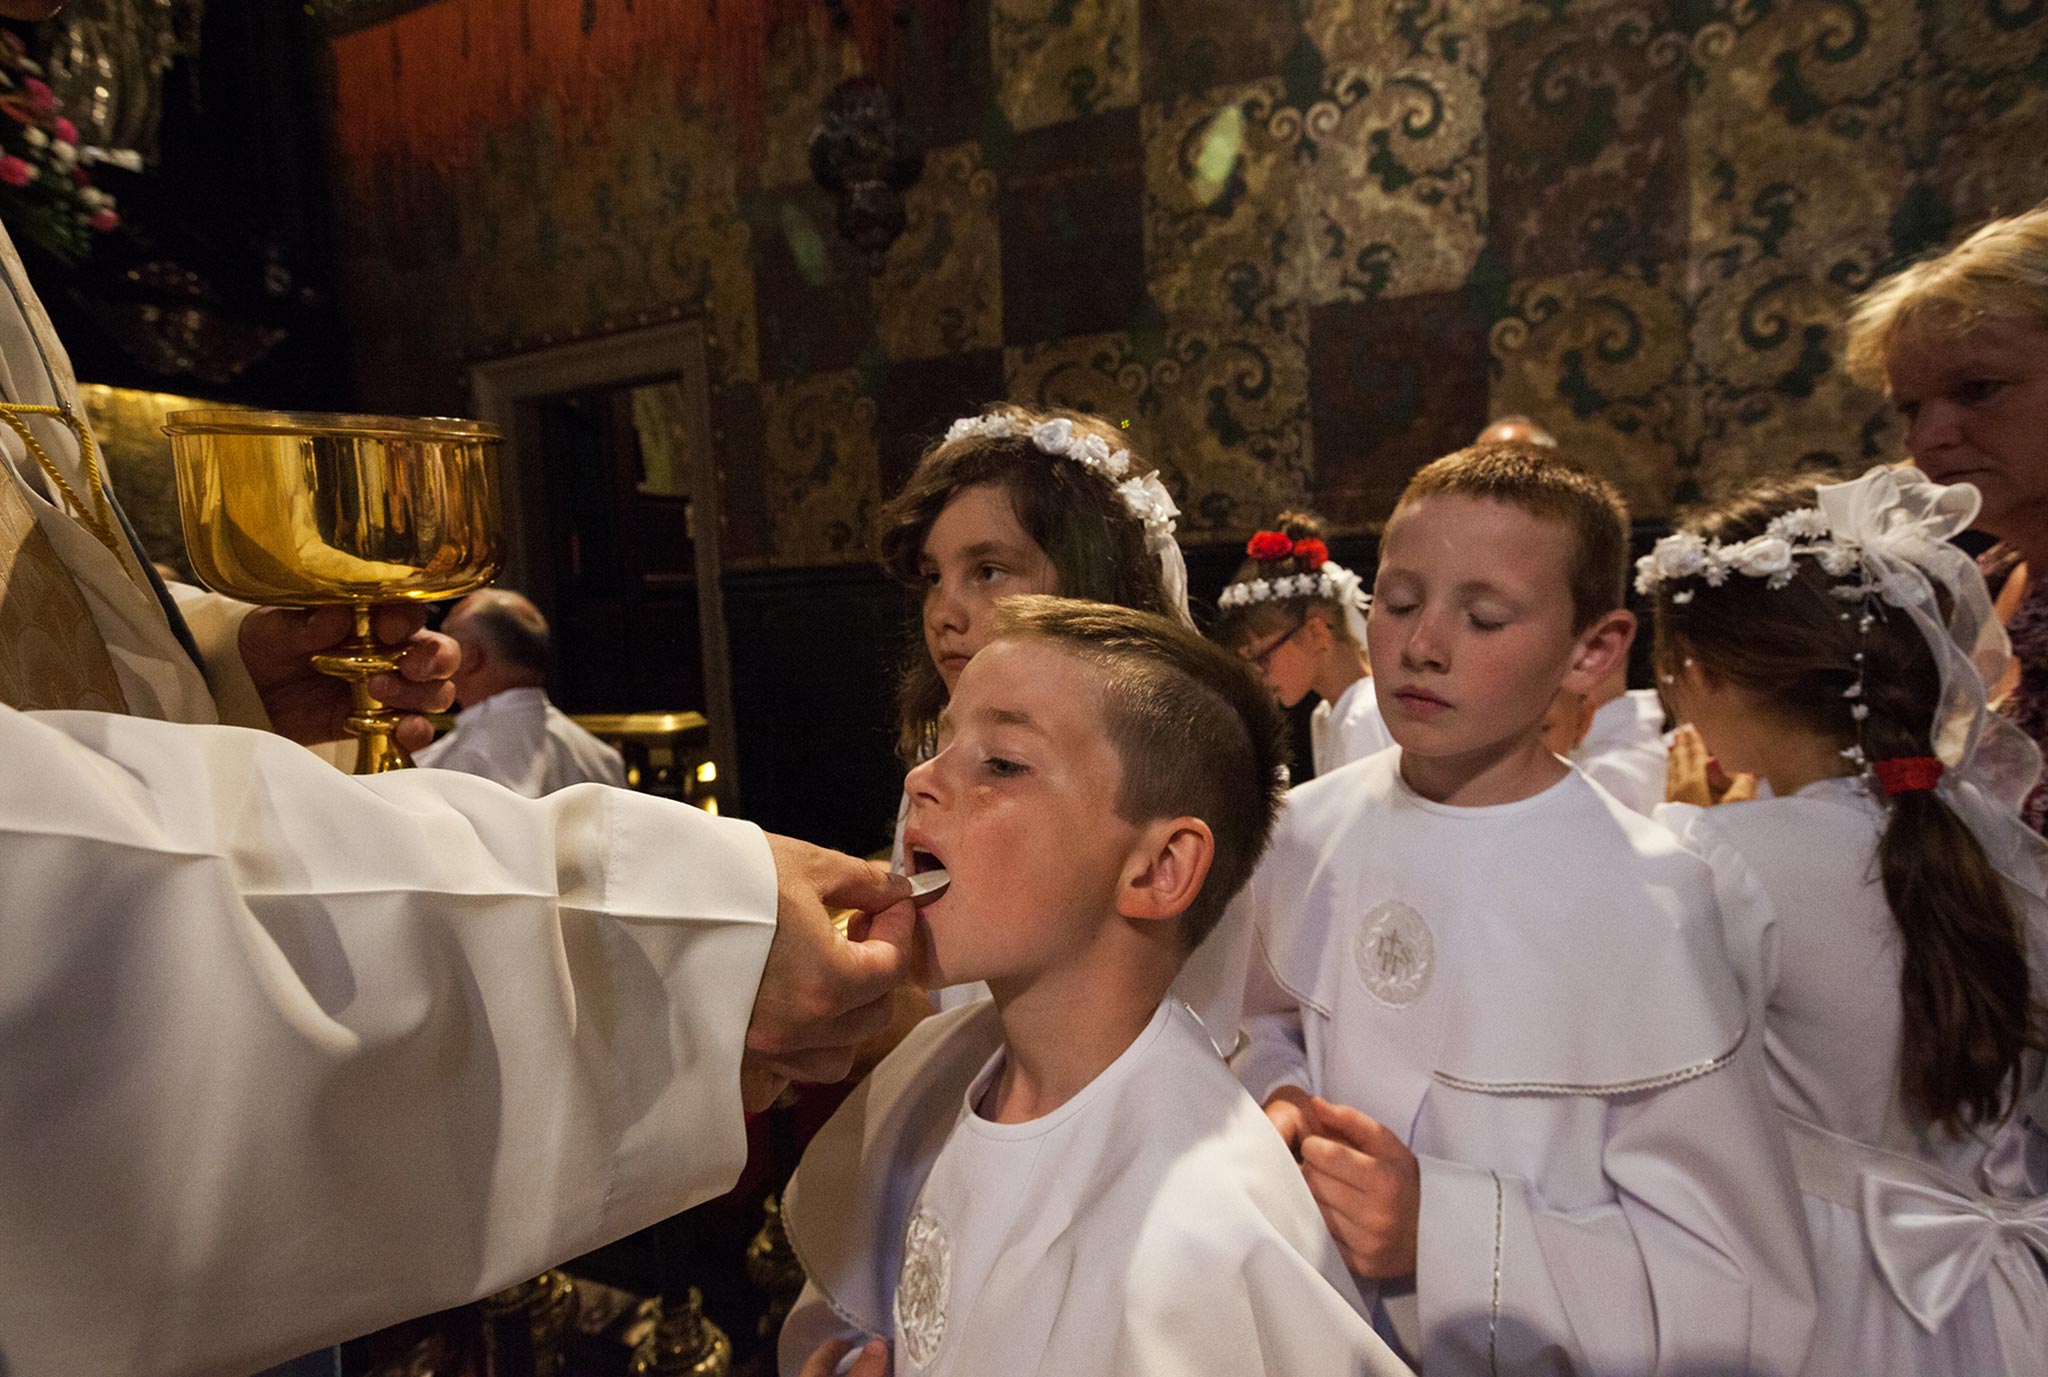 A boy receives Communion at the Jasna Góra Monastery, in Częstochowa, Poland. The Black Madonna—a revered painting of a dark-skinned Virgin Mary and Child Jesus, said to be the work of St. Luke—is housed in this sanctuary.